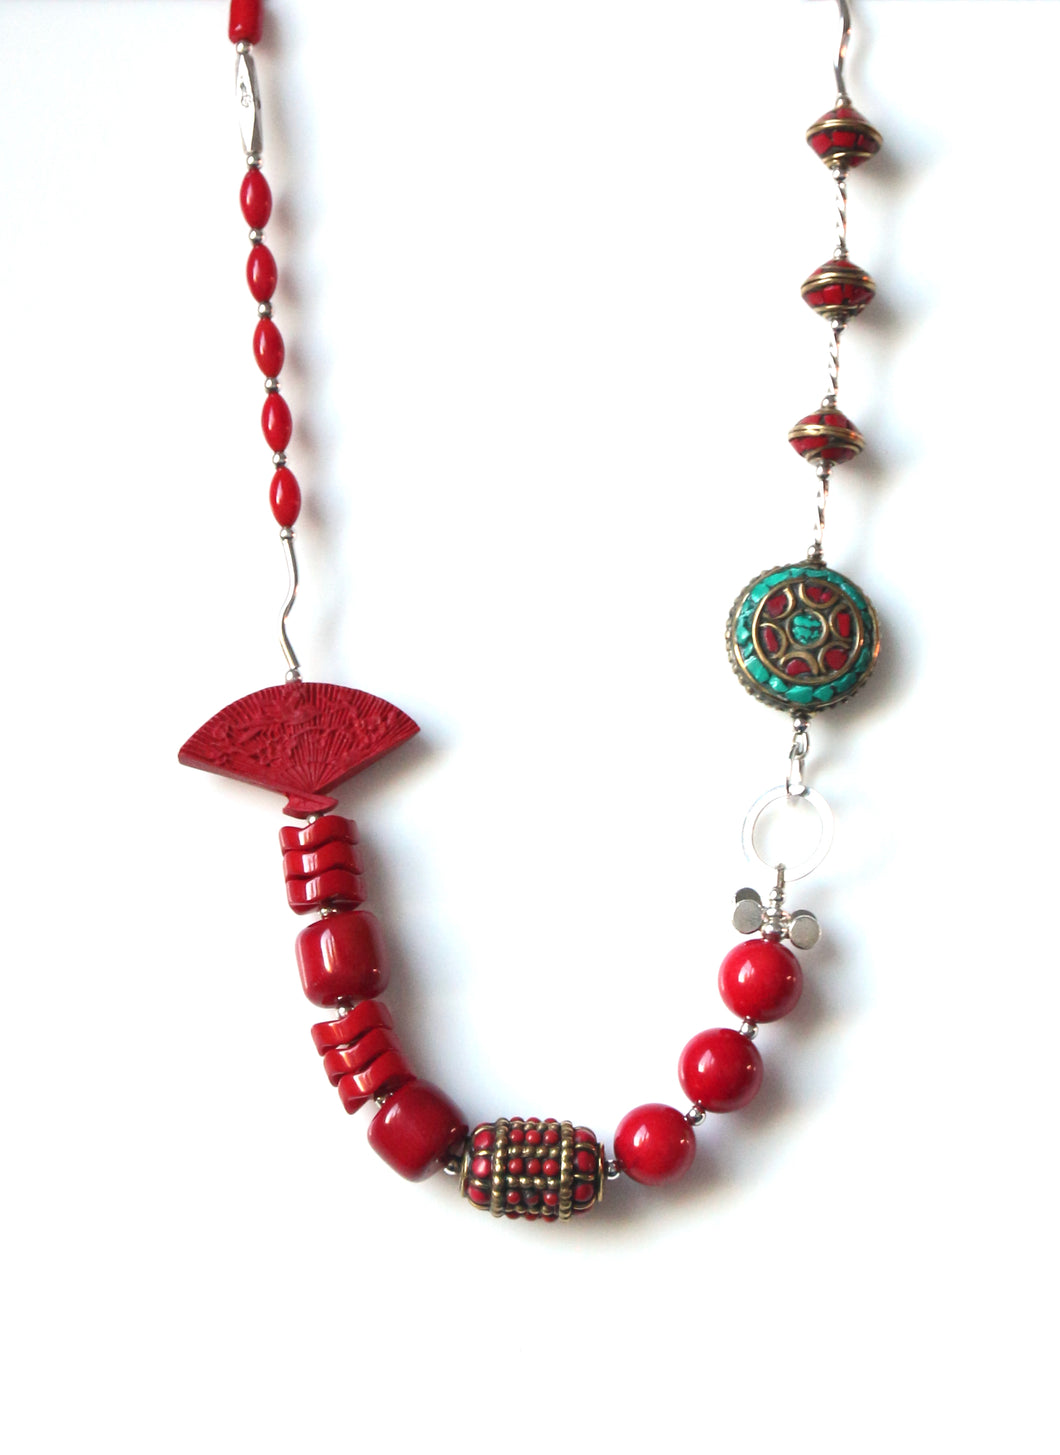 Australian Handmade Red Coral Cinnabar Fan Nepalese Beads Sterling Silver Necklace